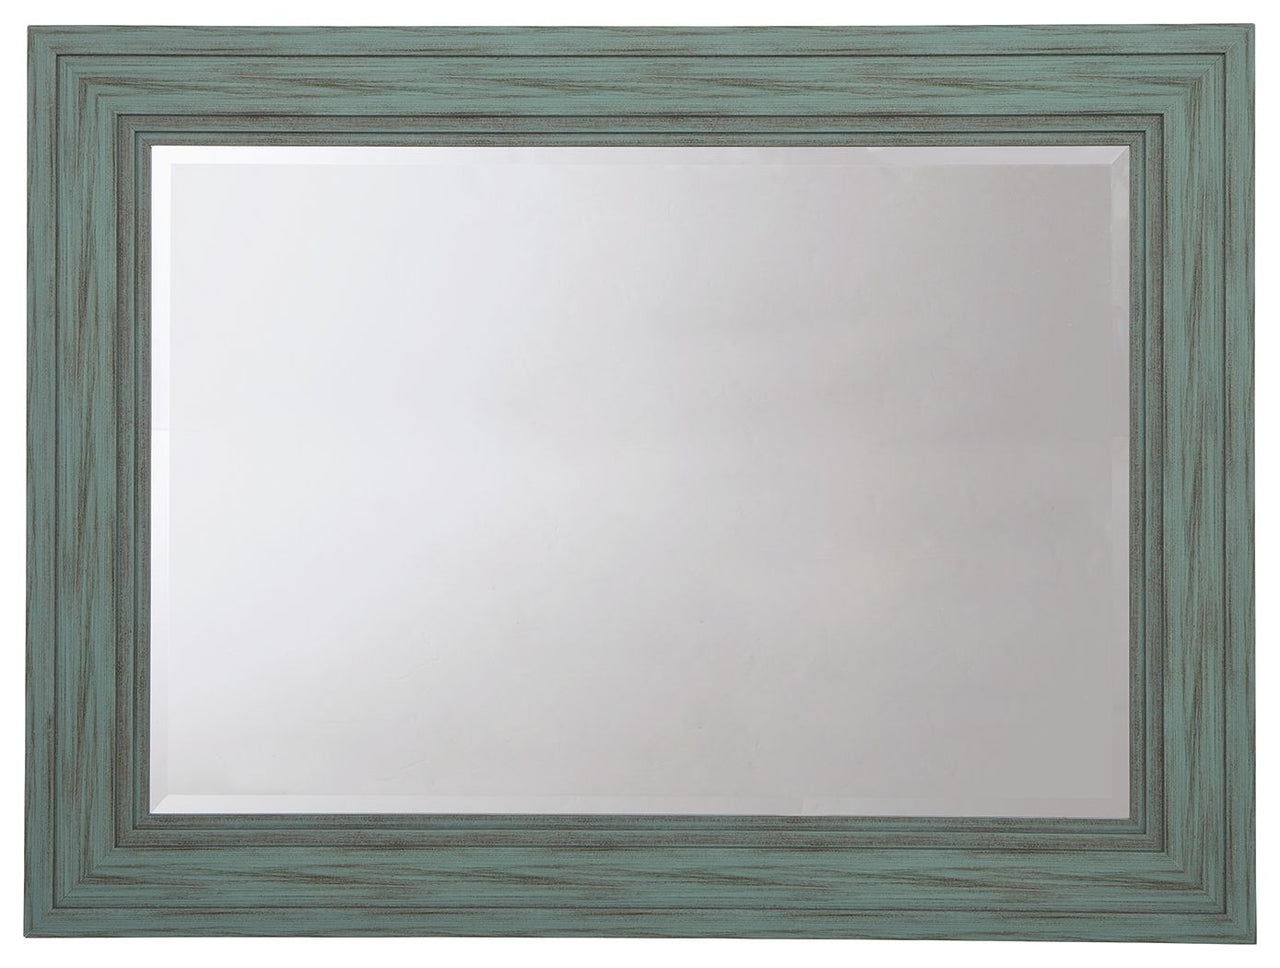 Jacee - Accent Mirror - Tony's Home Furnishings